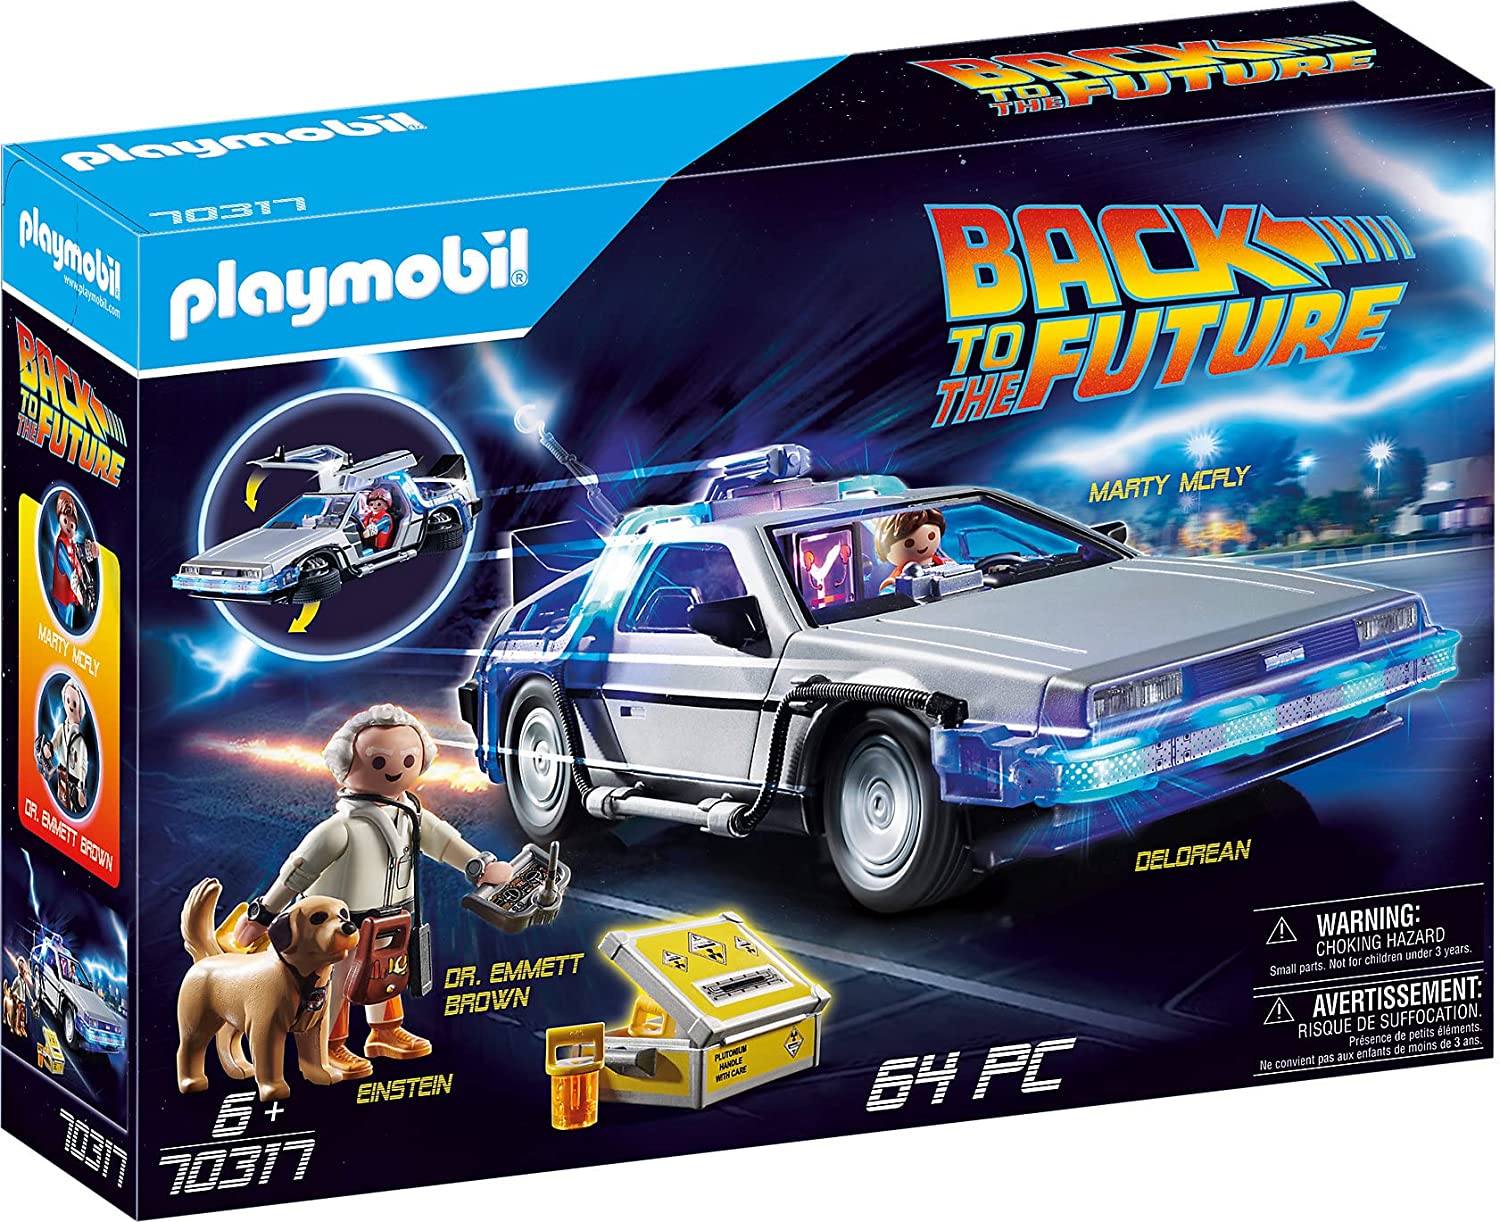 64-Piece PLAYMOBIL Back to The Future DeLorean Playset w/ Working Lights $27 + Free Shipping